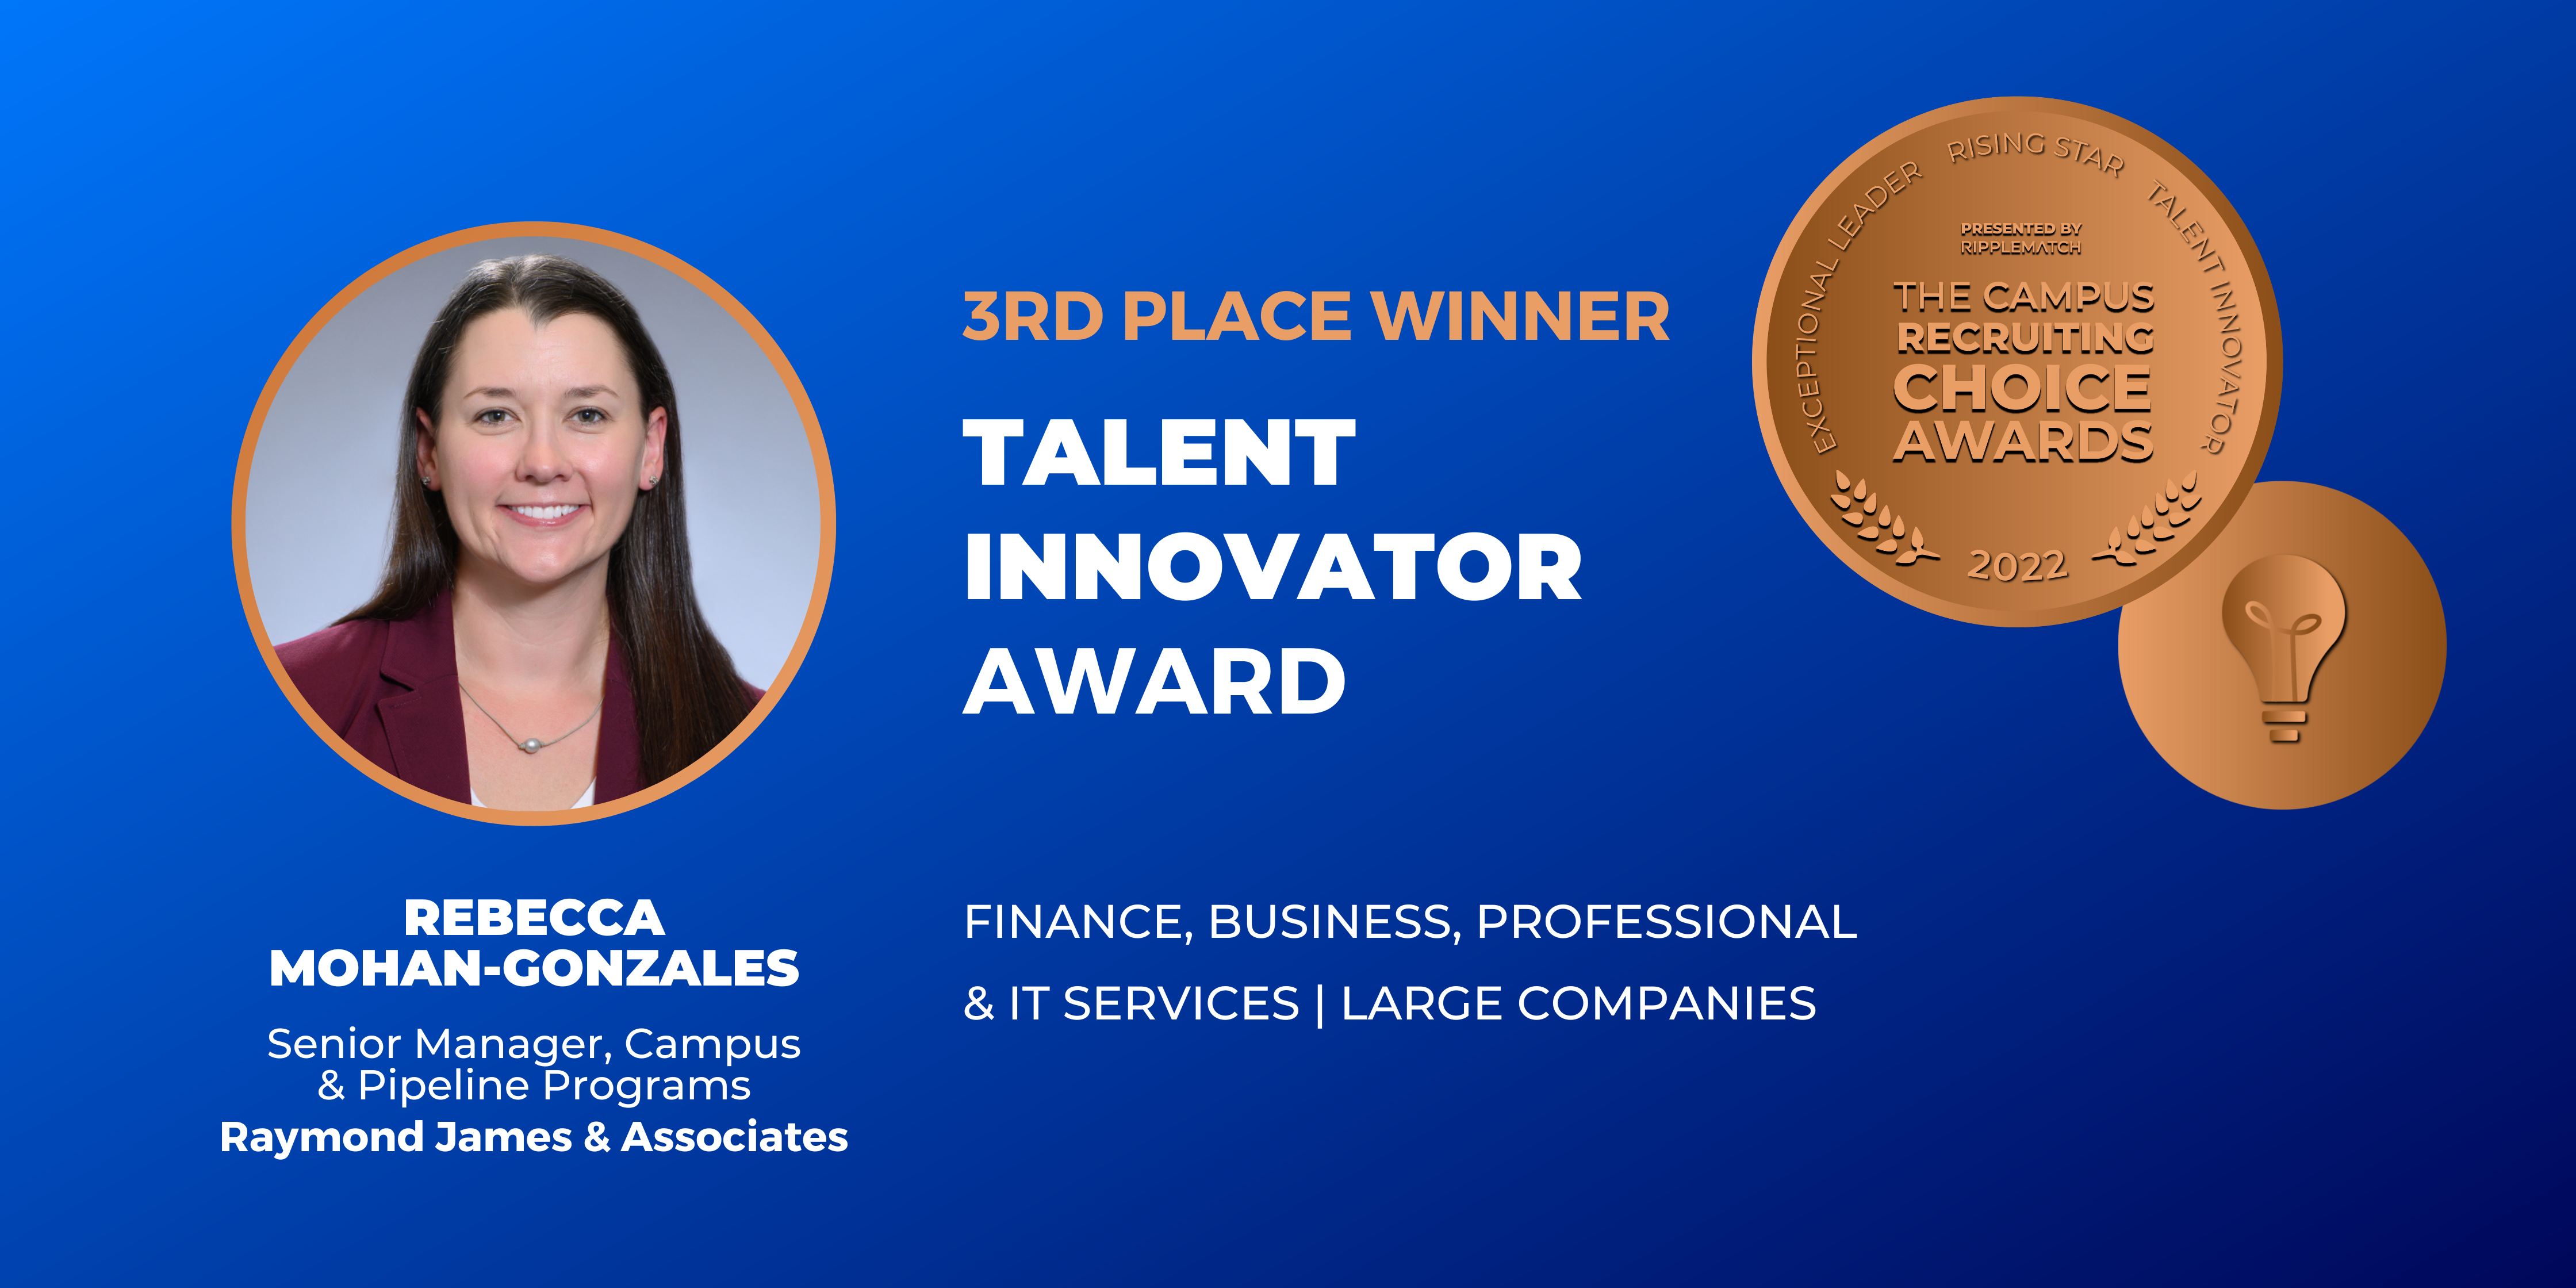 TALENT INNOVATOR - 3rd place - Finance, Business, Professional & IT Services  Large Companies - Rebecca Mohan-Gonzales